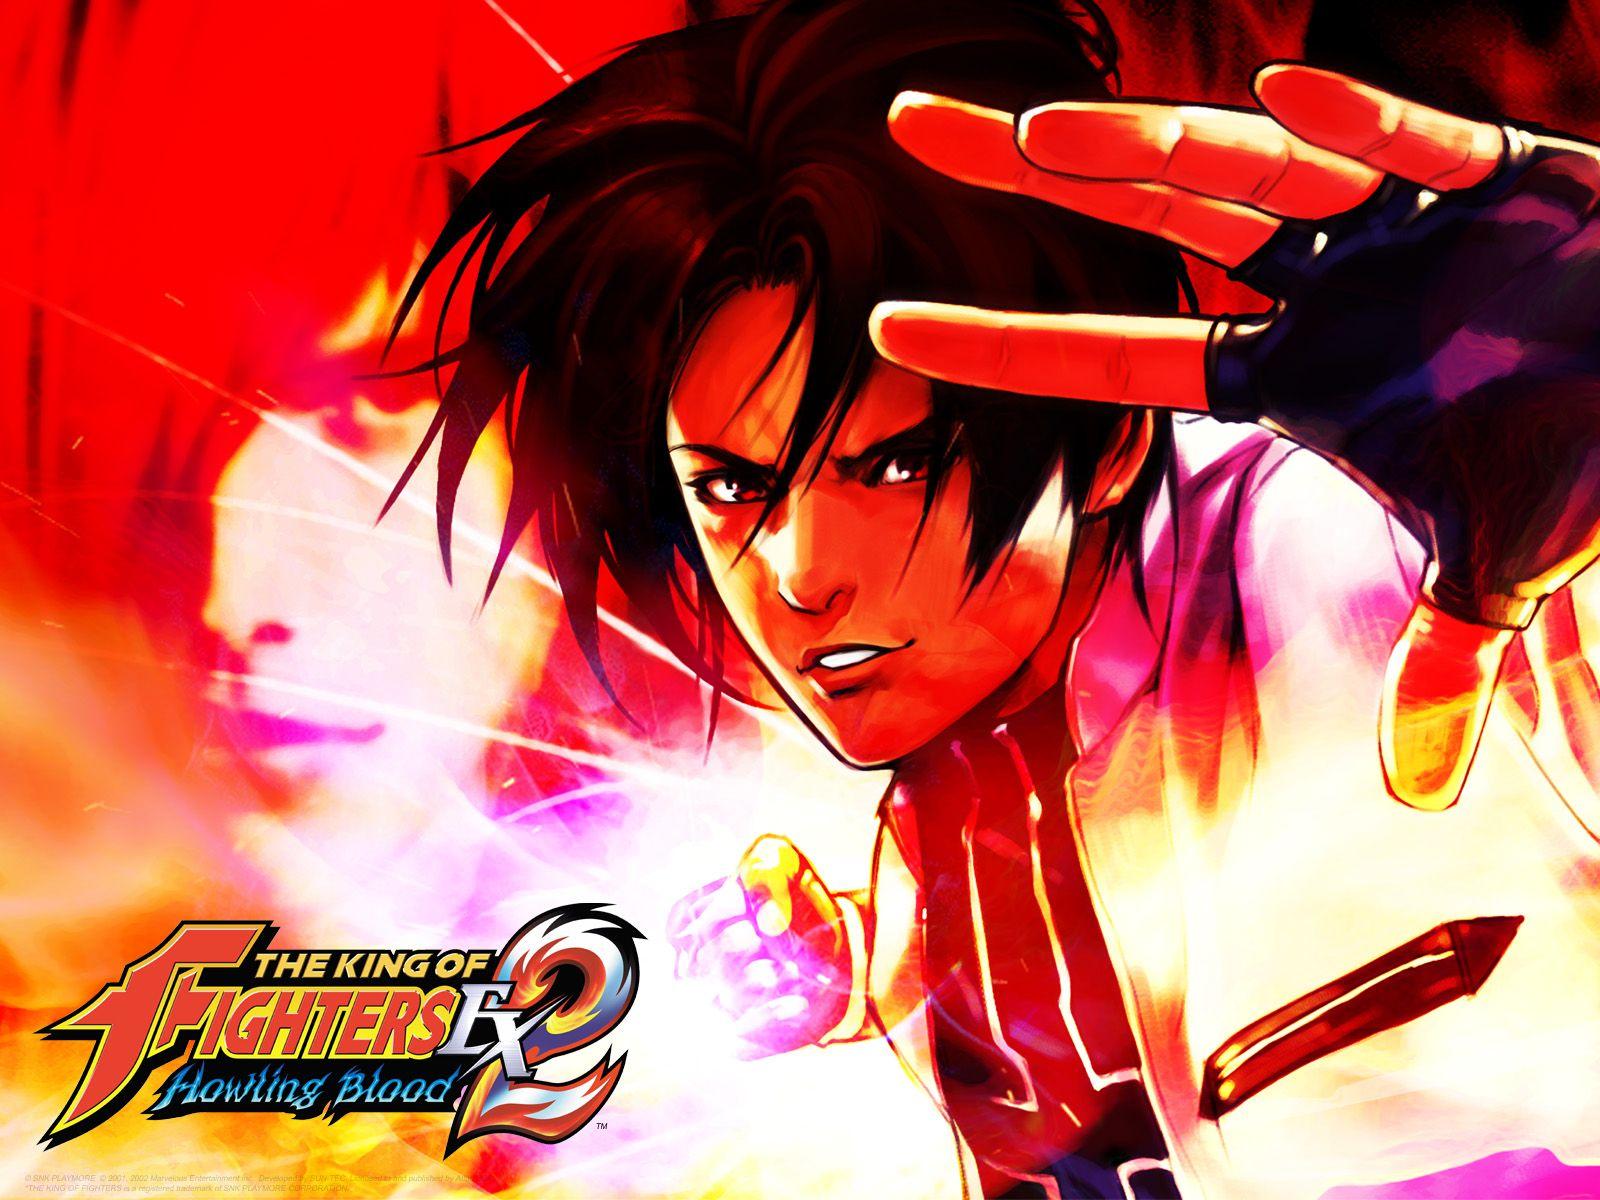 Atlus USA presents The King of Fighters EX2: Howling Blood